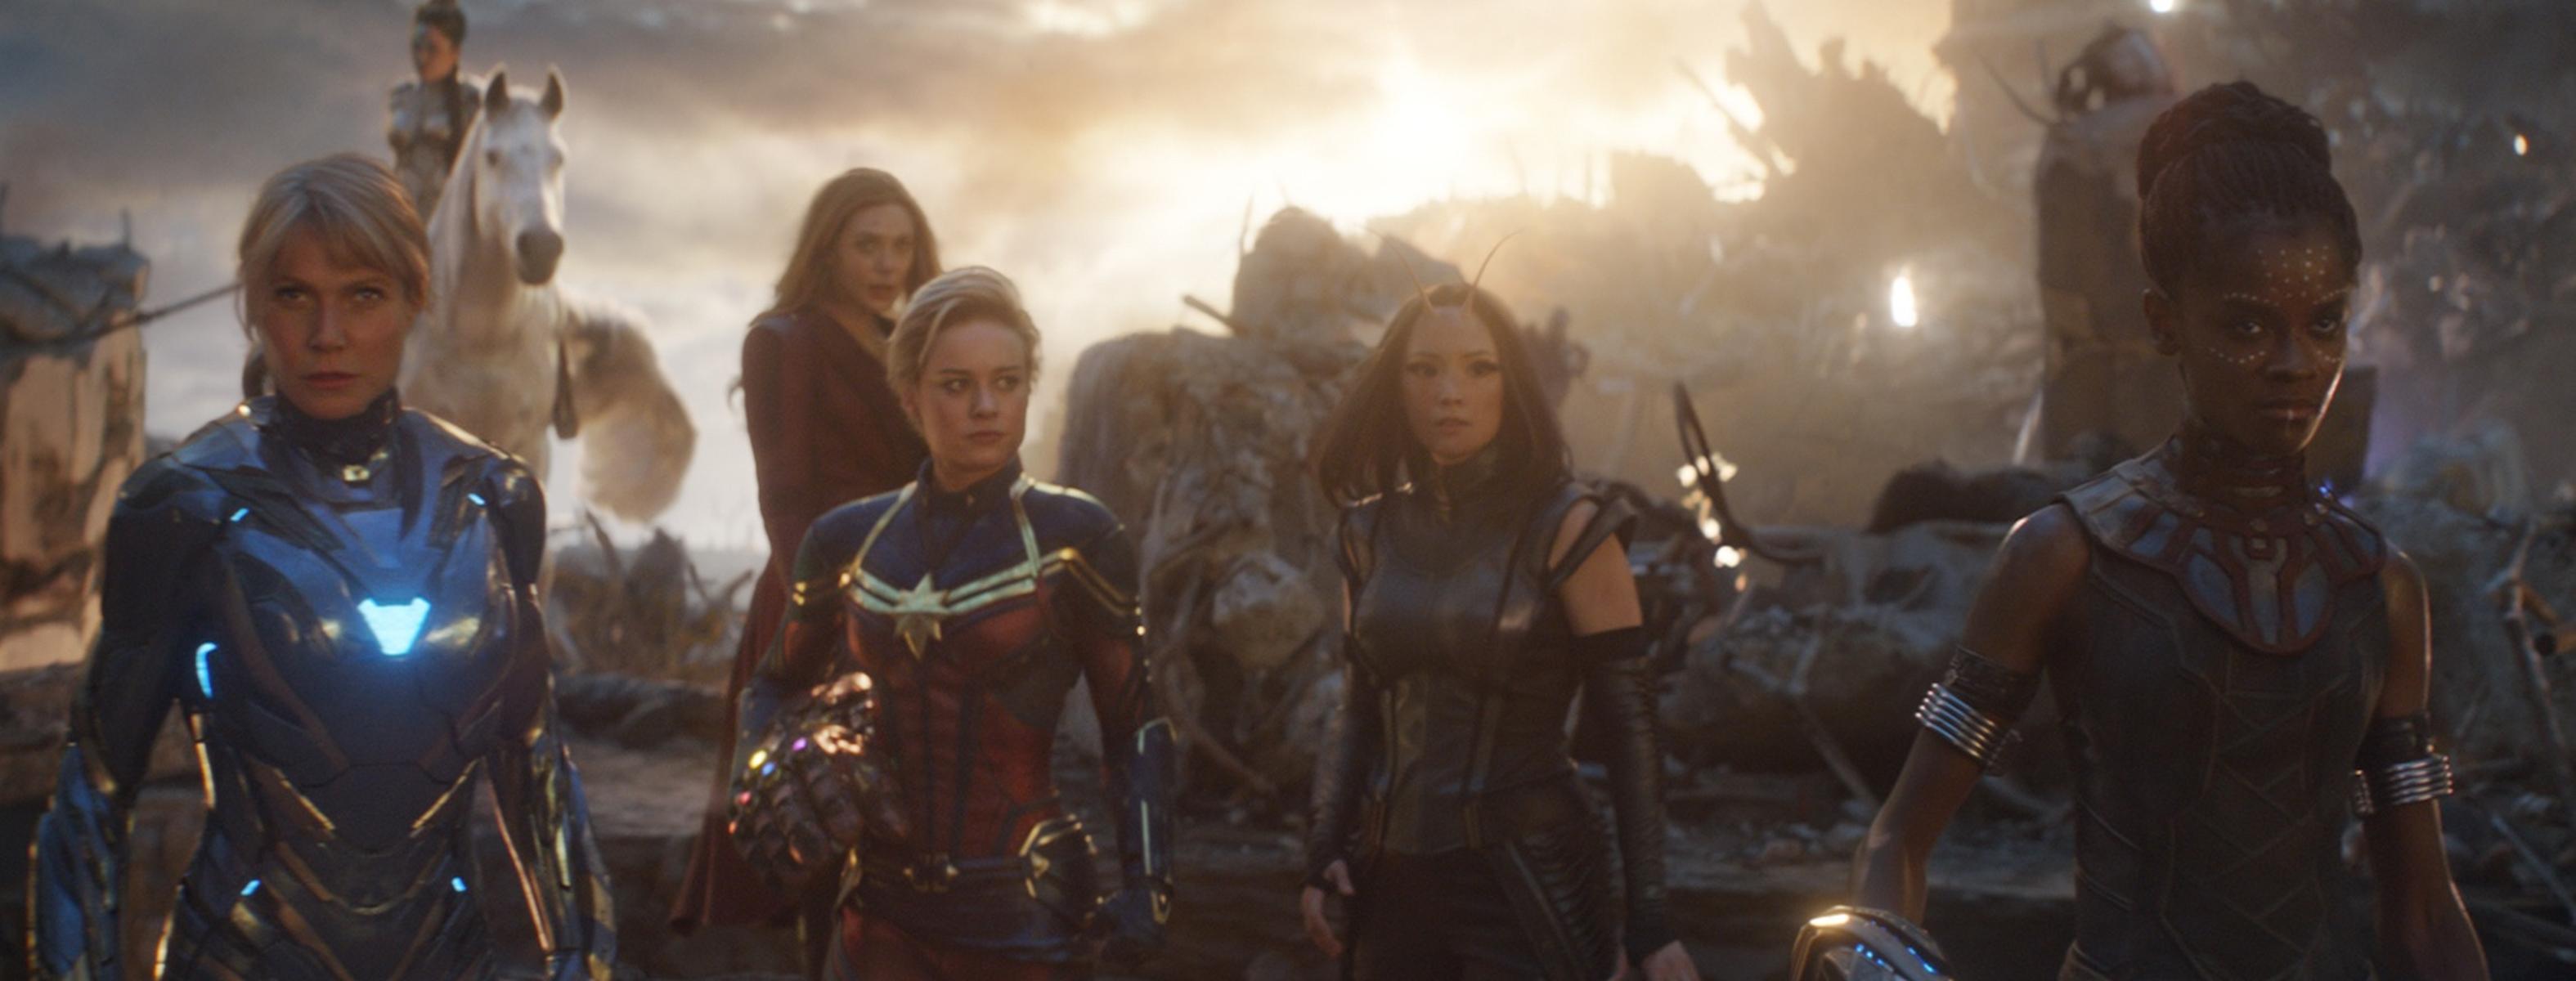 Avengers: Endgame' doesn't boast the most Oscar-y cast ever assembled -  GoldDerby